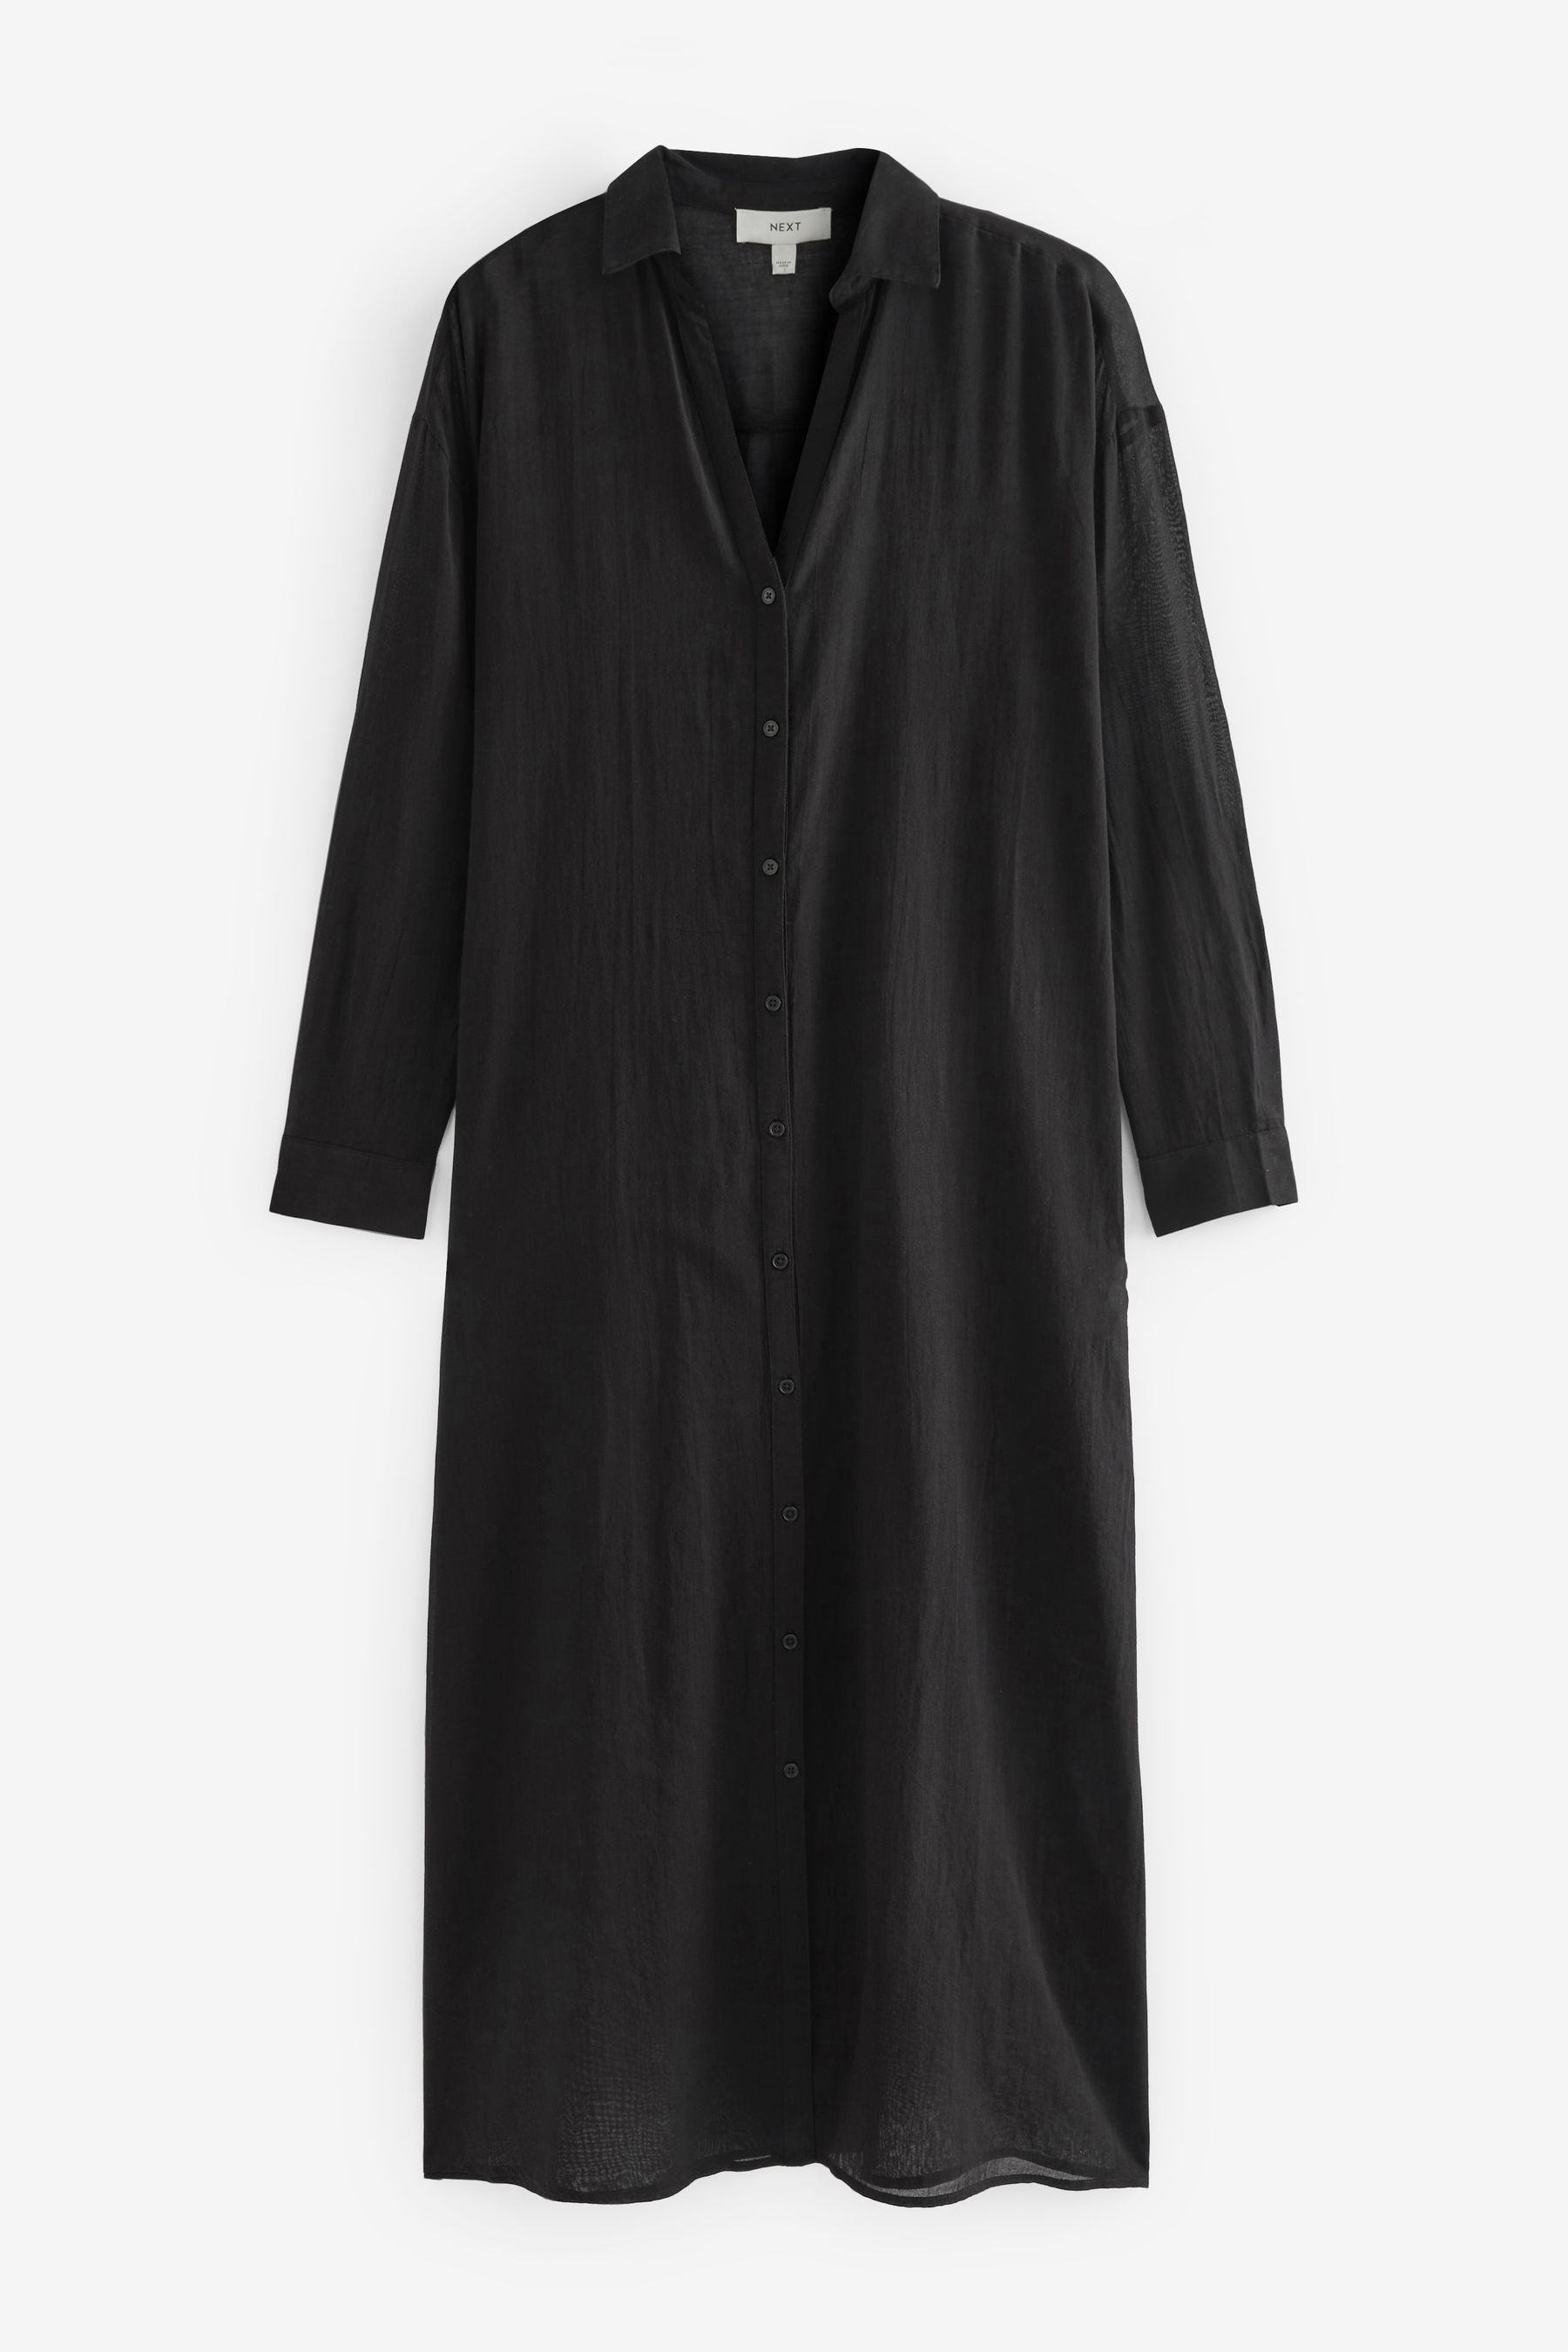 Buy Black Maxi Beach Shirt Cover Up from the Next UK online shop